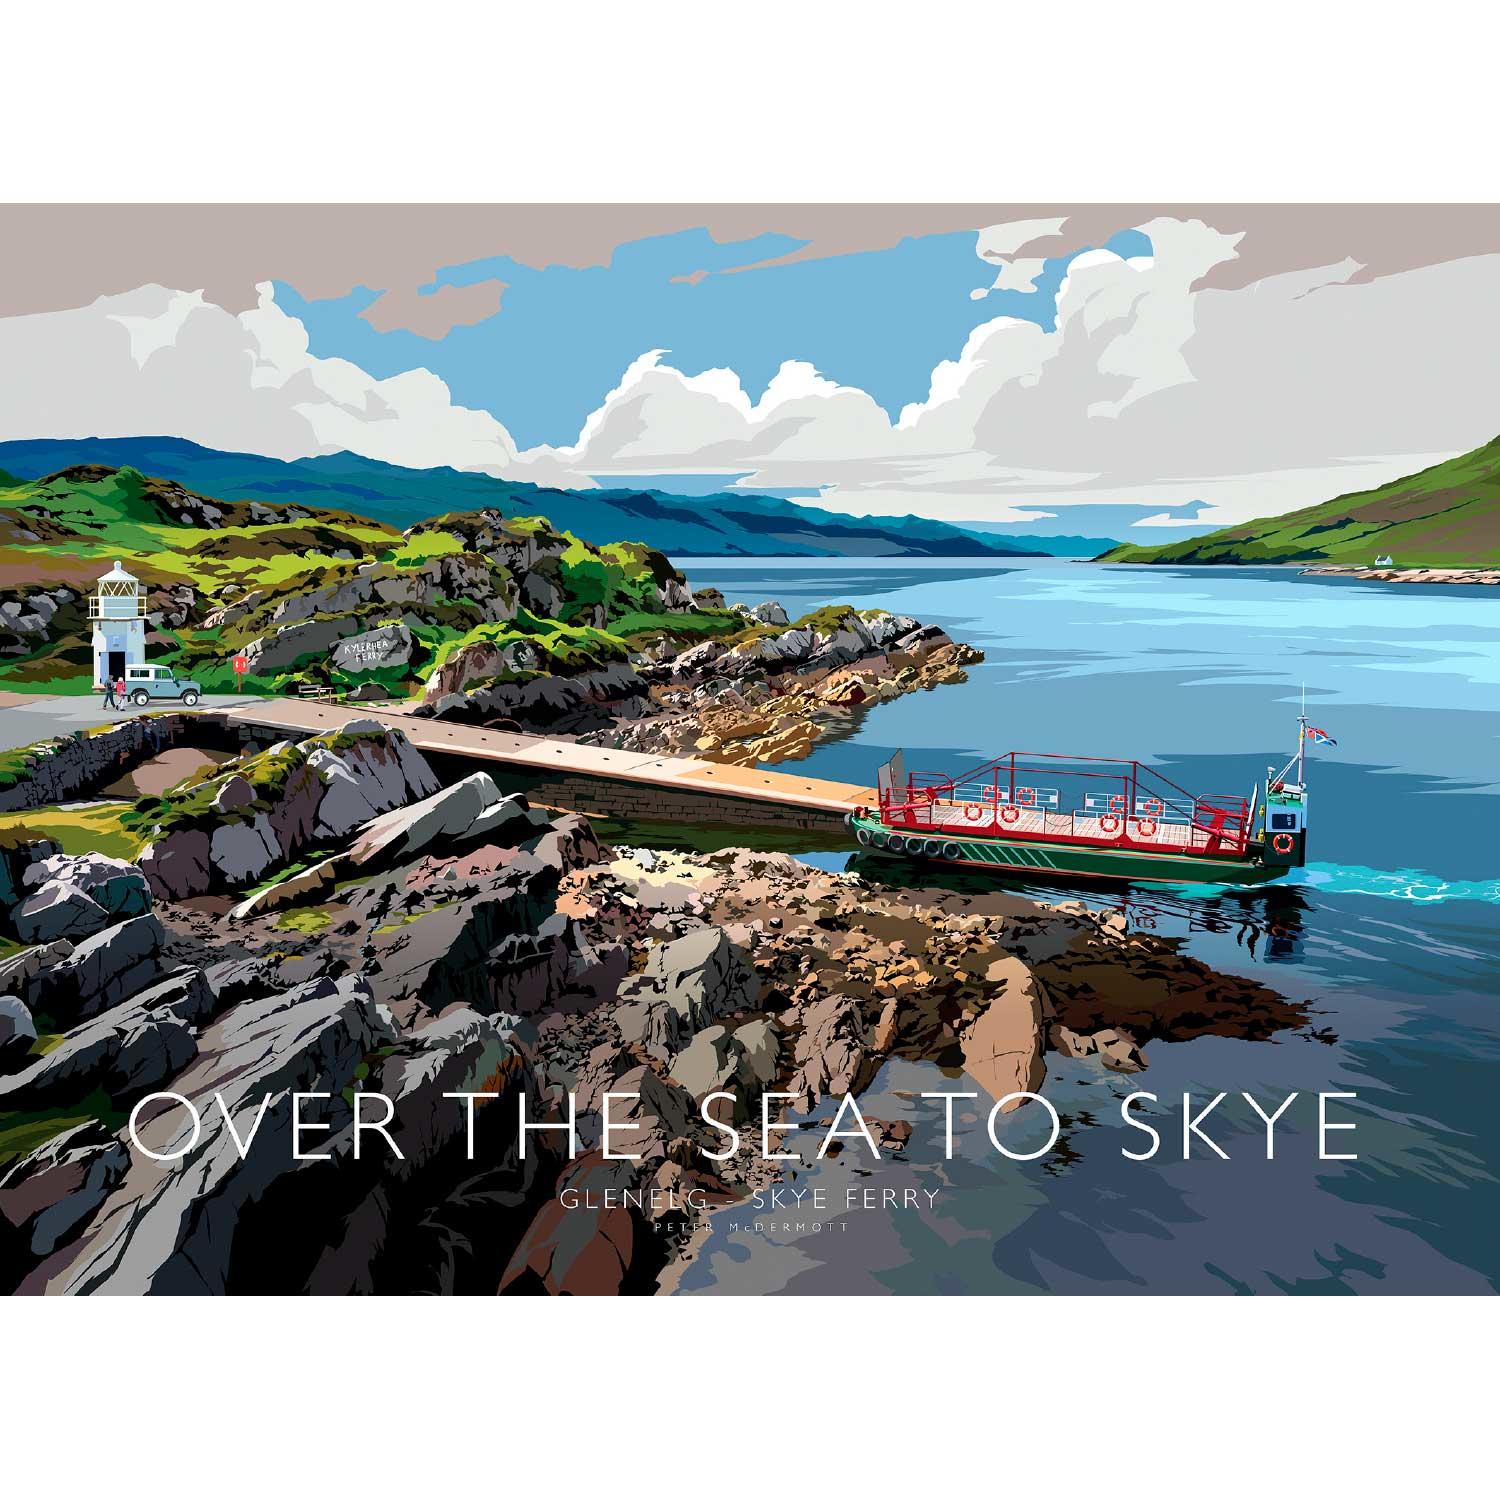 Over the Sea to Skye by Peter McDermott